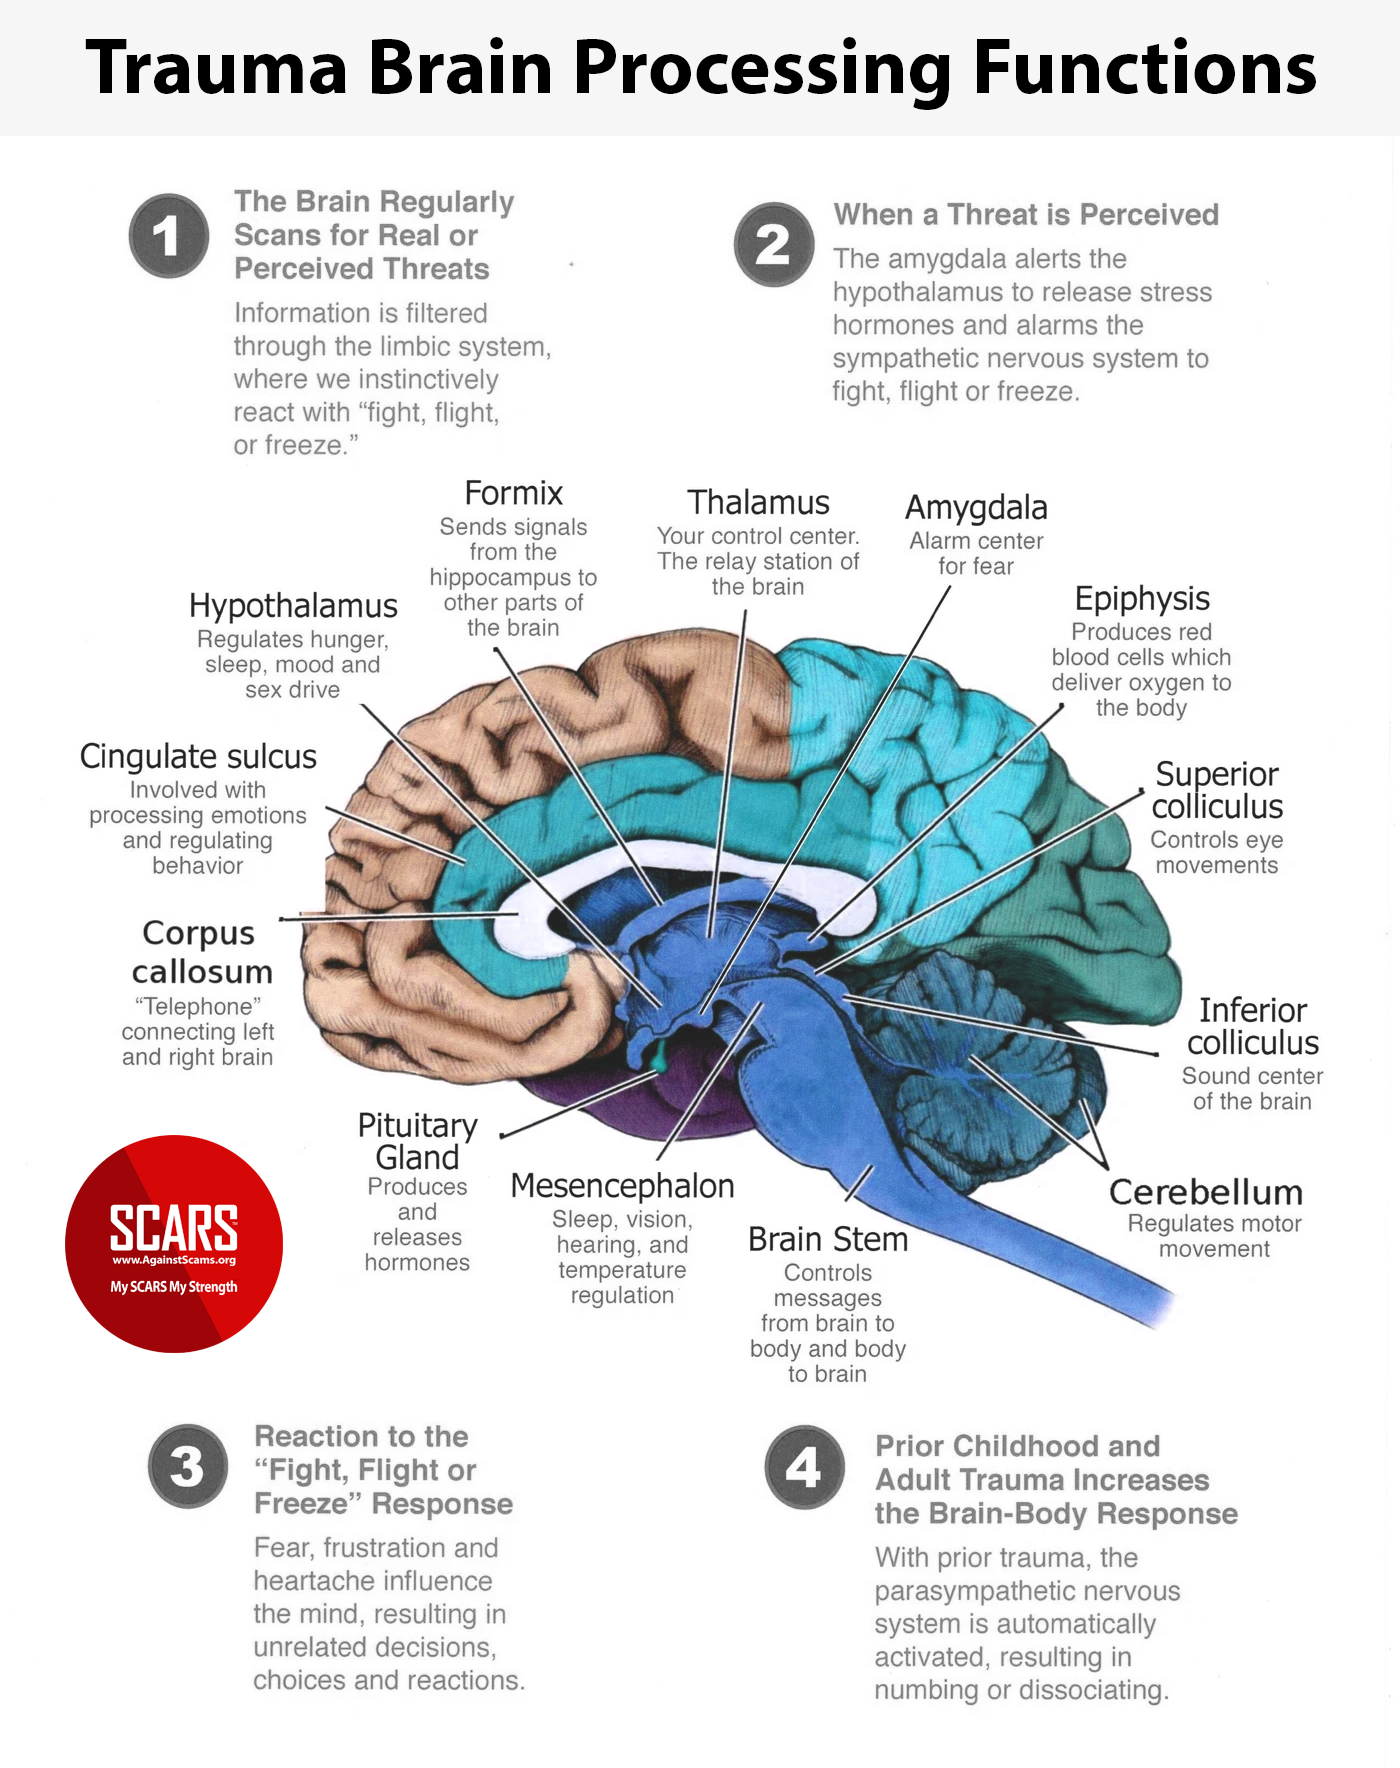 Trauma - Brain Processing Functions - Infographic 31